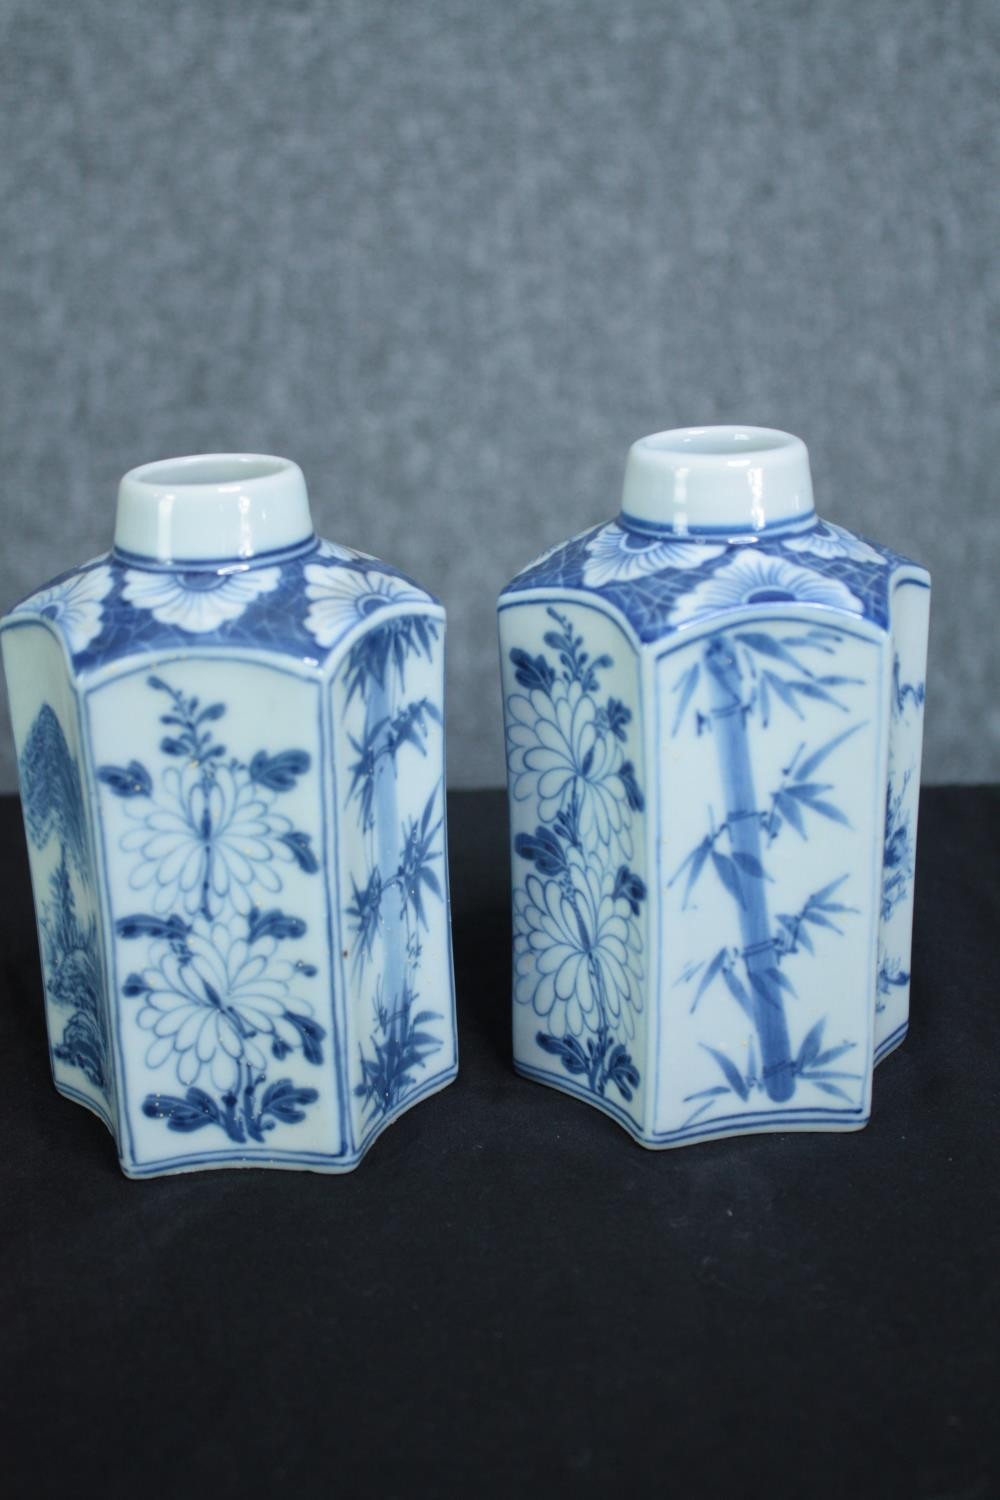 A mixed collection of blue and white Chinese porcelain including a teapot and vases. Signed on the - Image 4 of 12